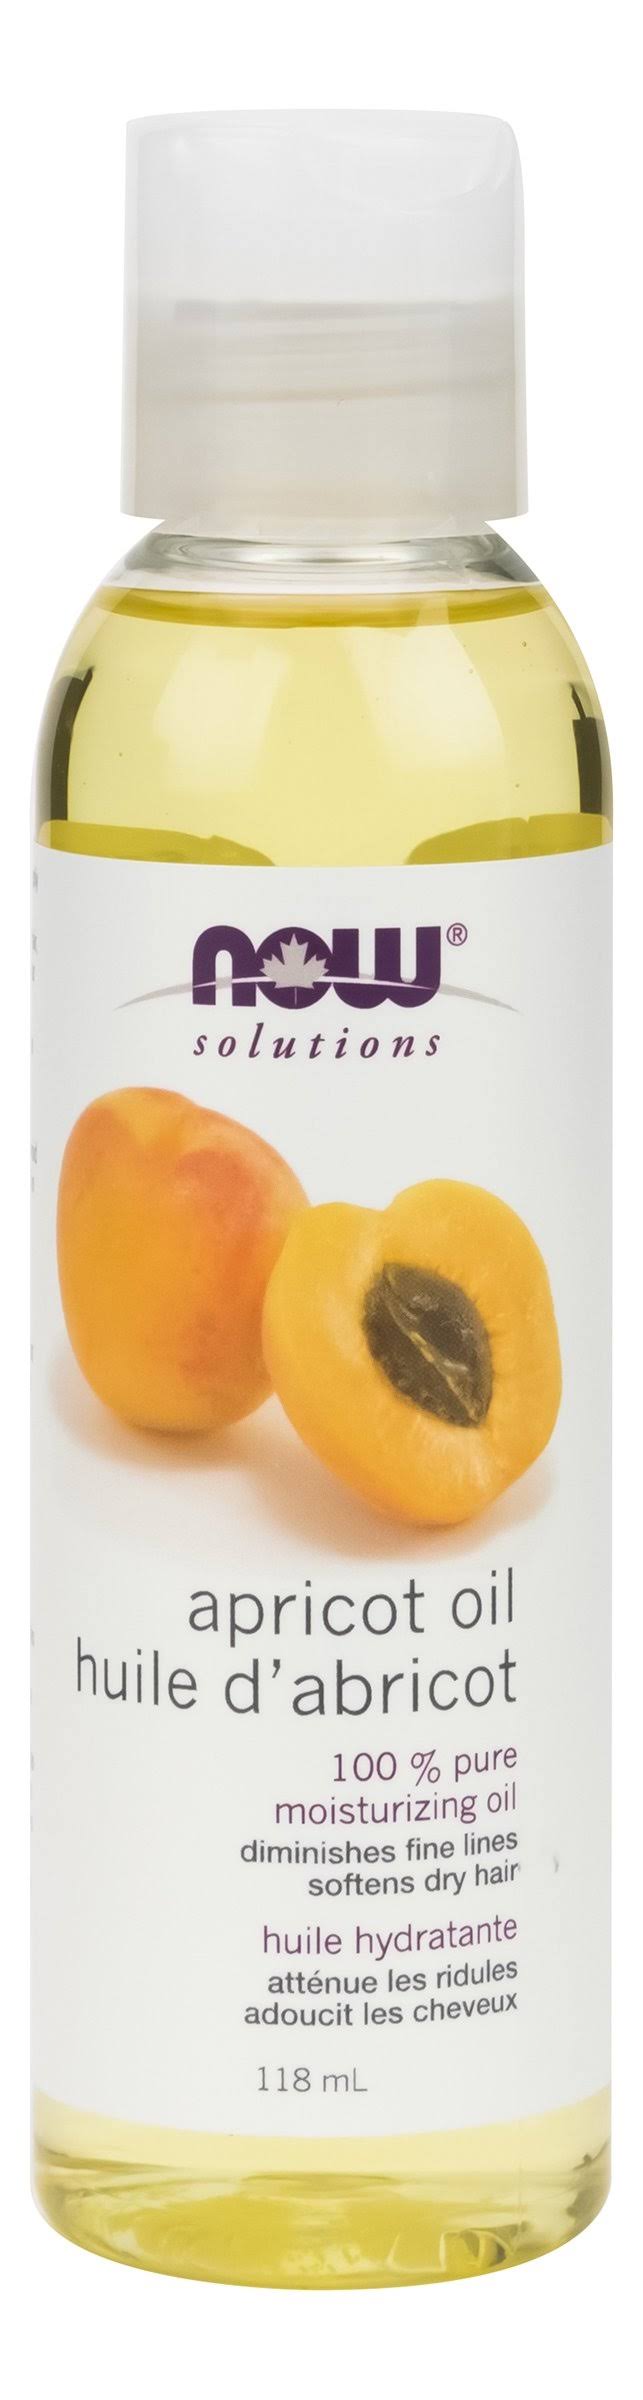 Now Solutions Apricot Kernel Oil - 118ml